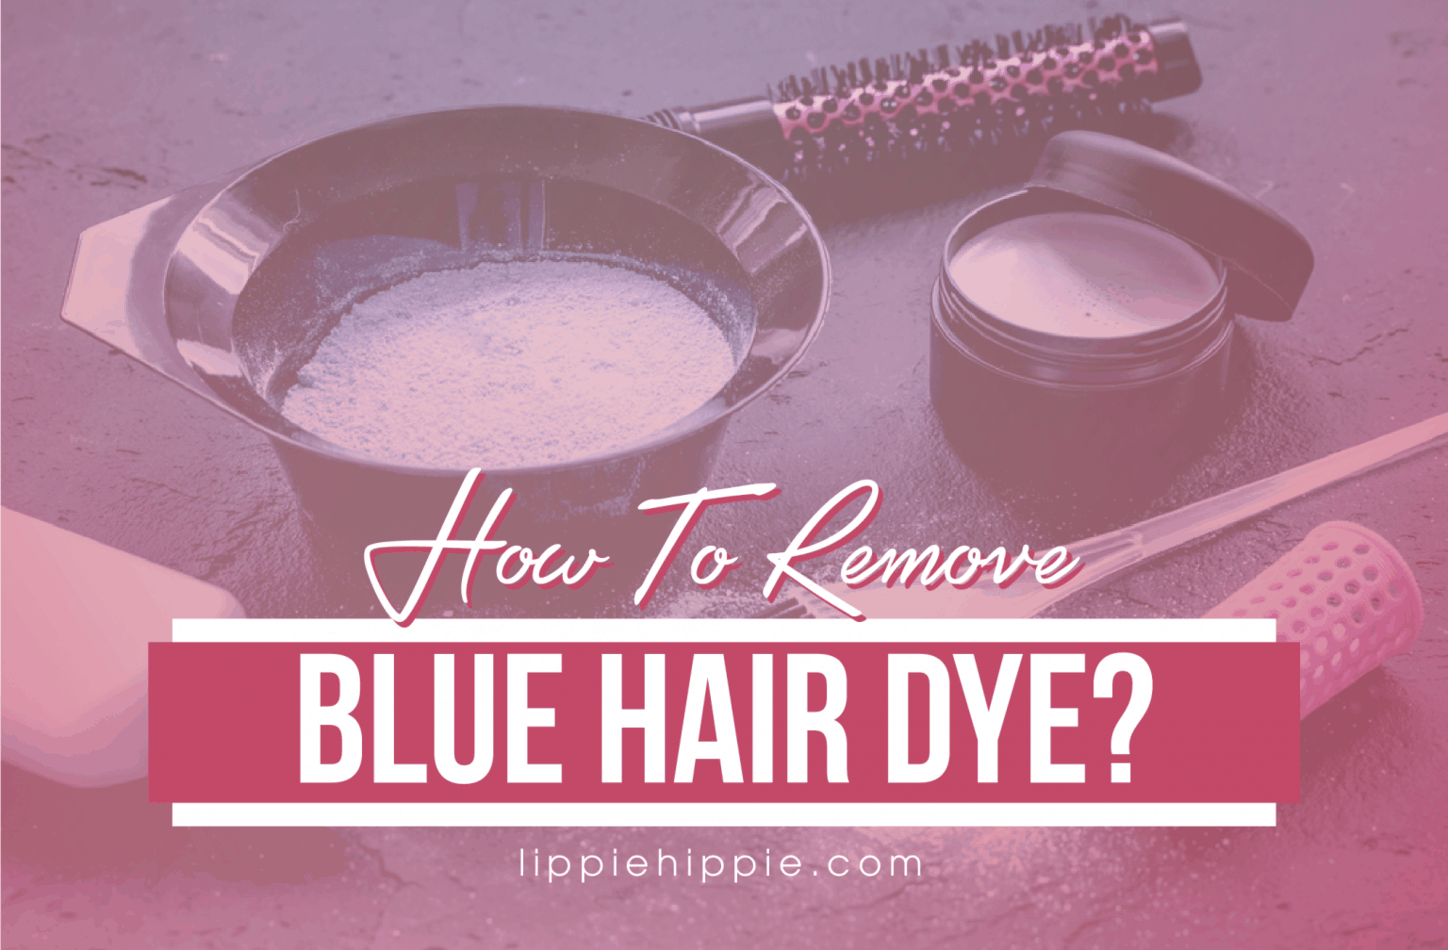 2. 5 Ways to Remove Blue or Green Hair Dye - wide 3